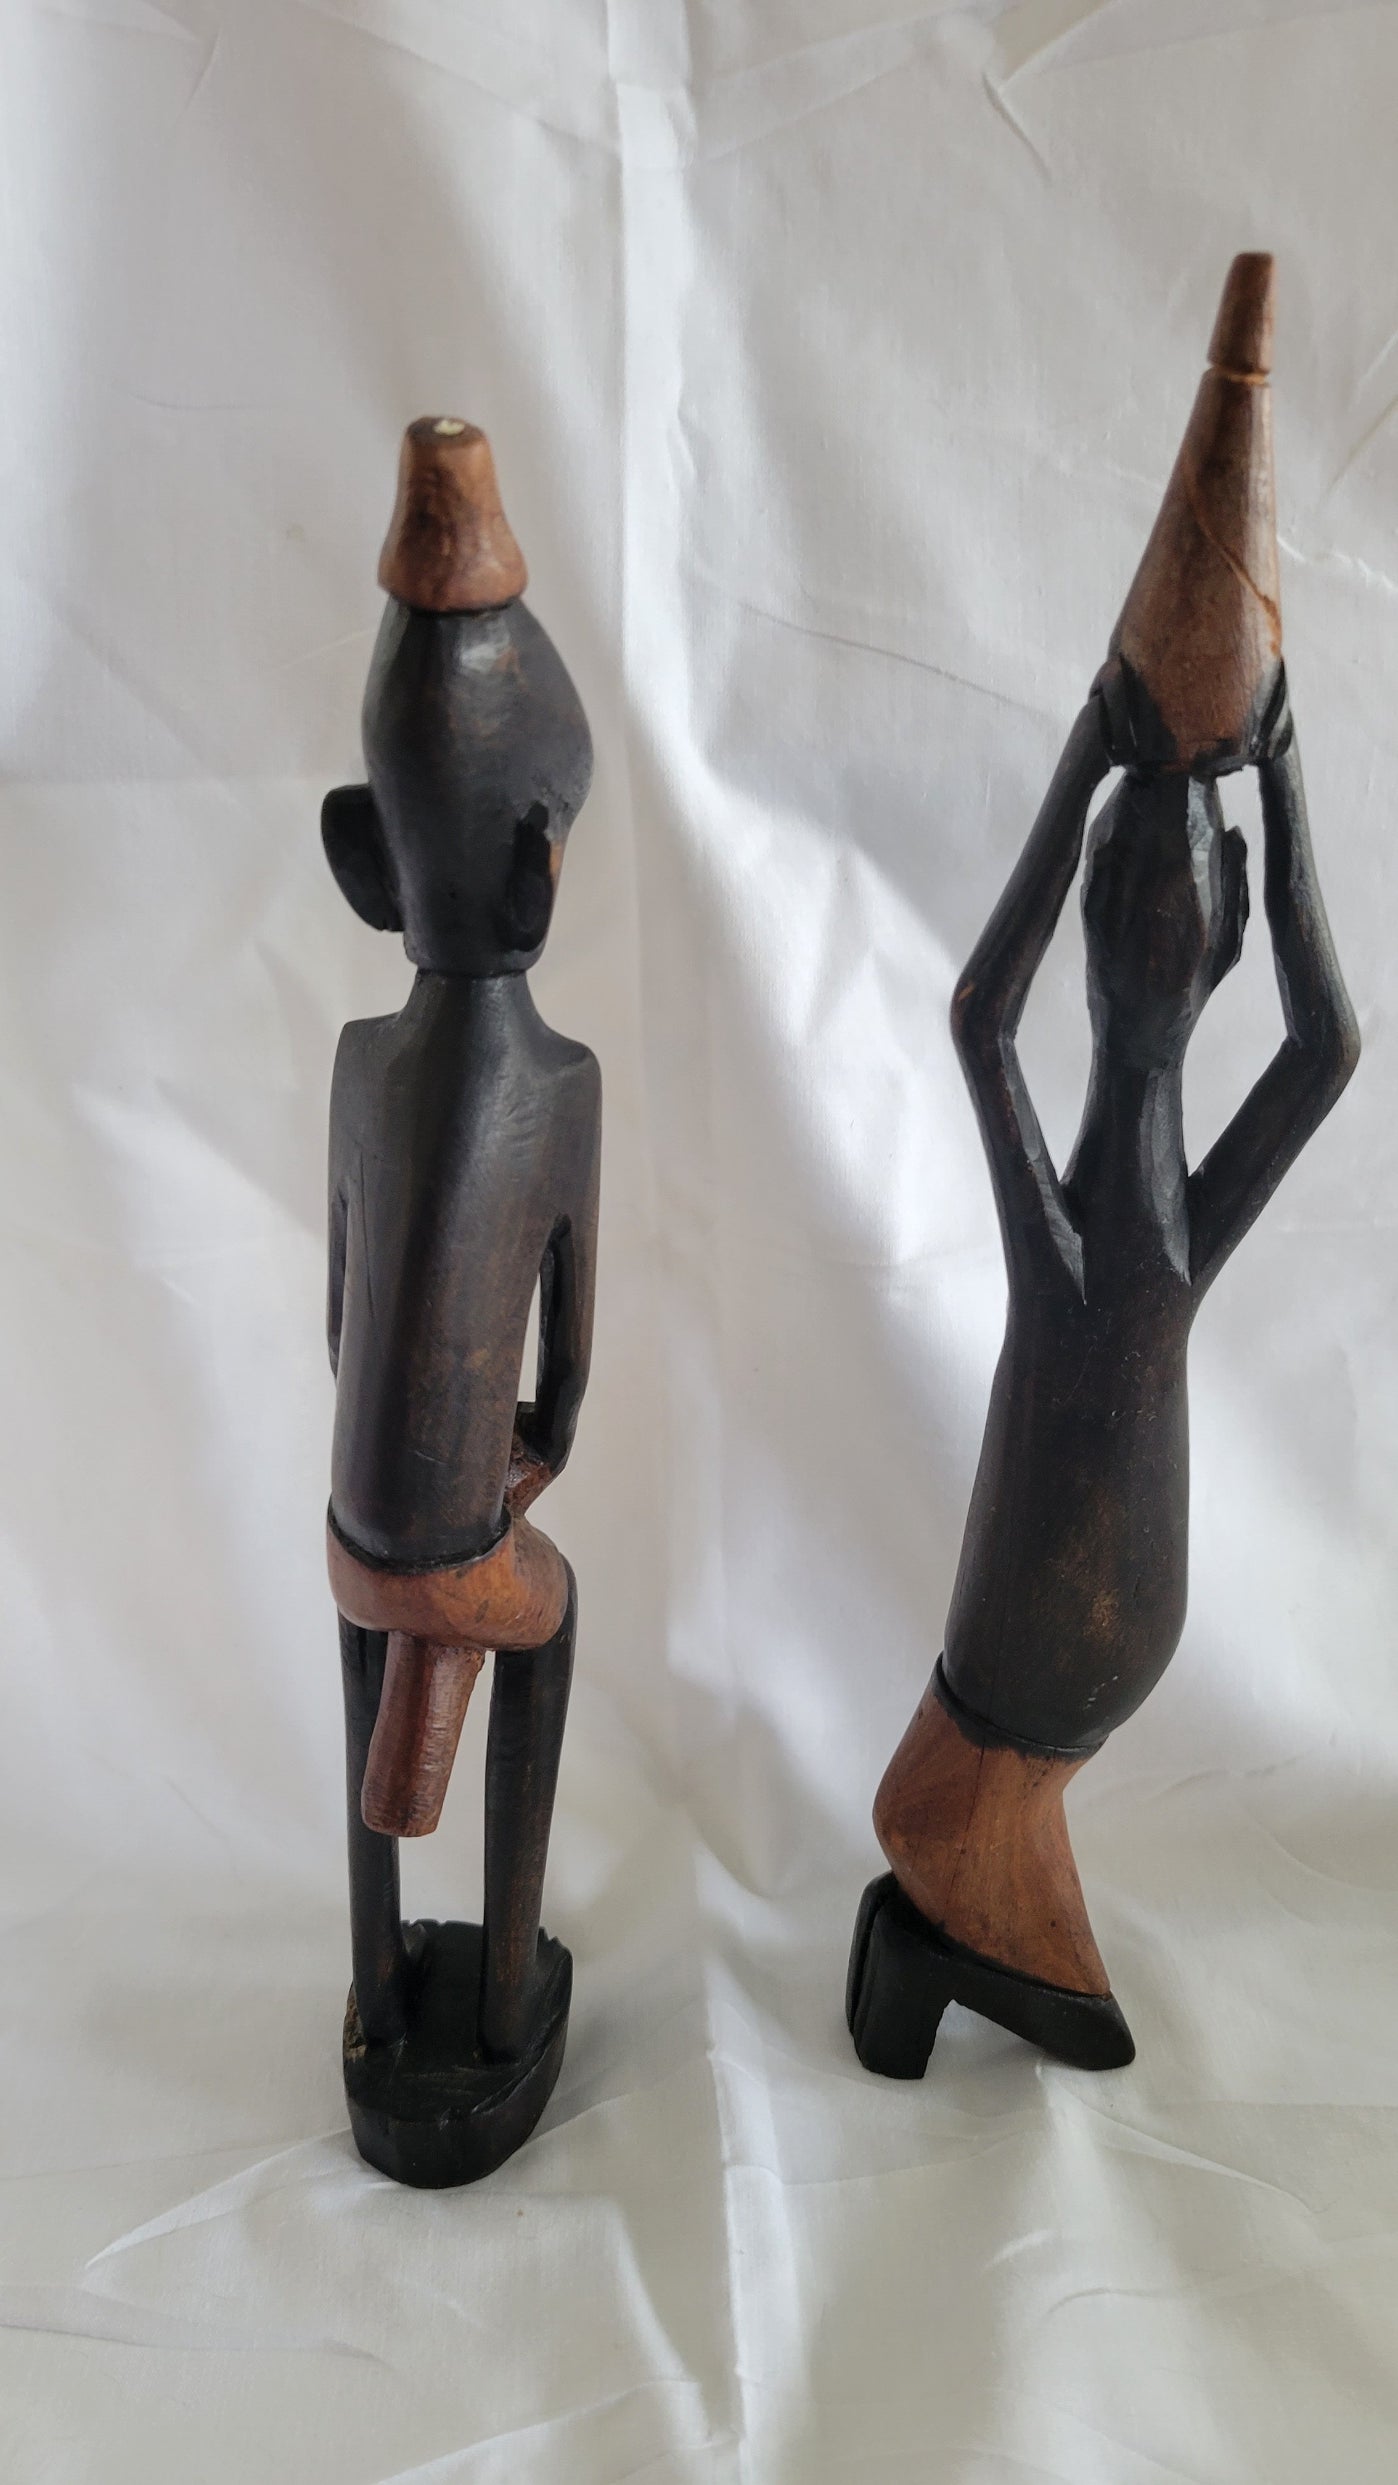 Set of two vintage wooden figures, male holding drum between knees, women with basket on head. Back view.